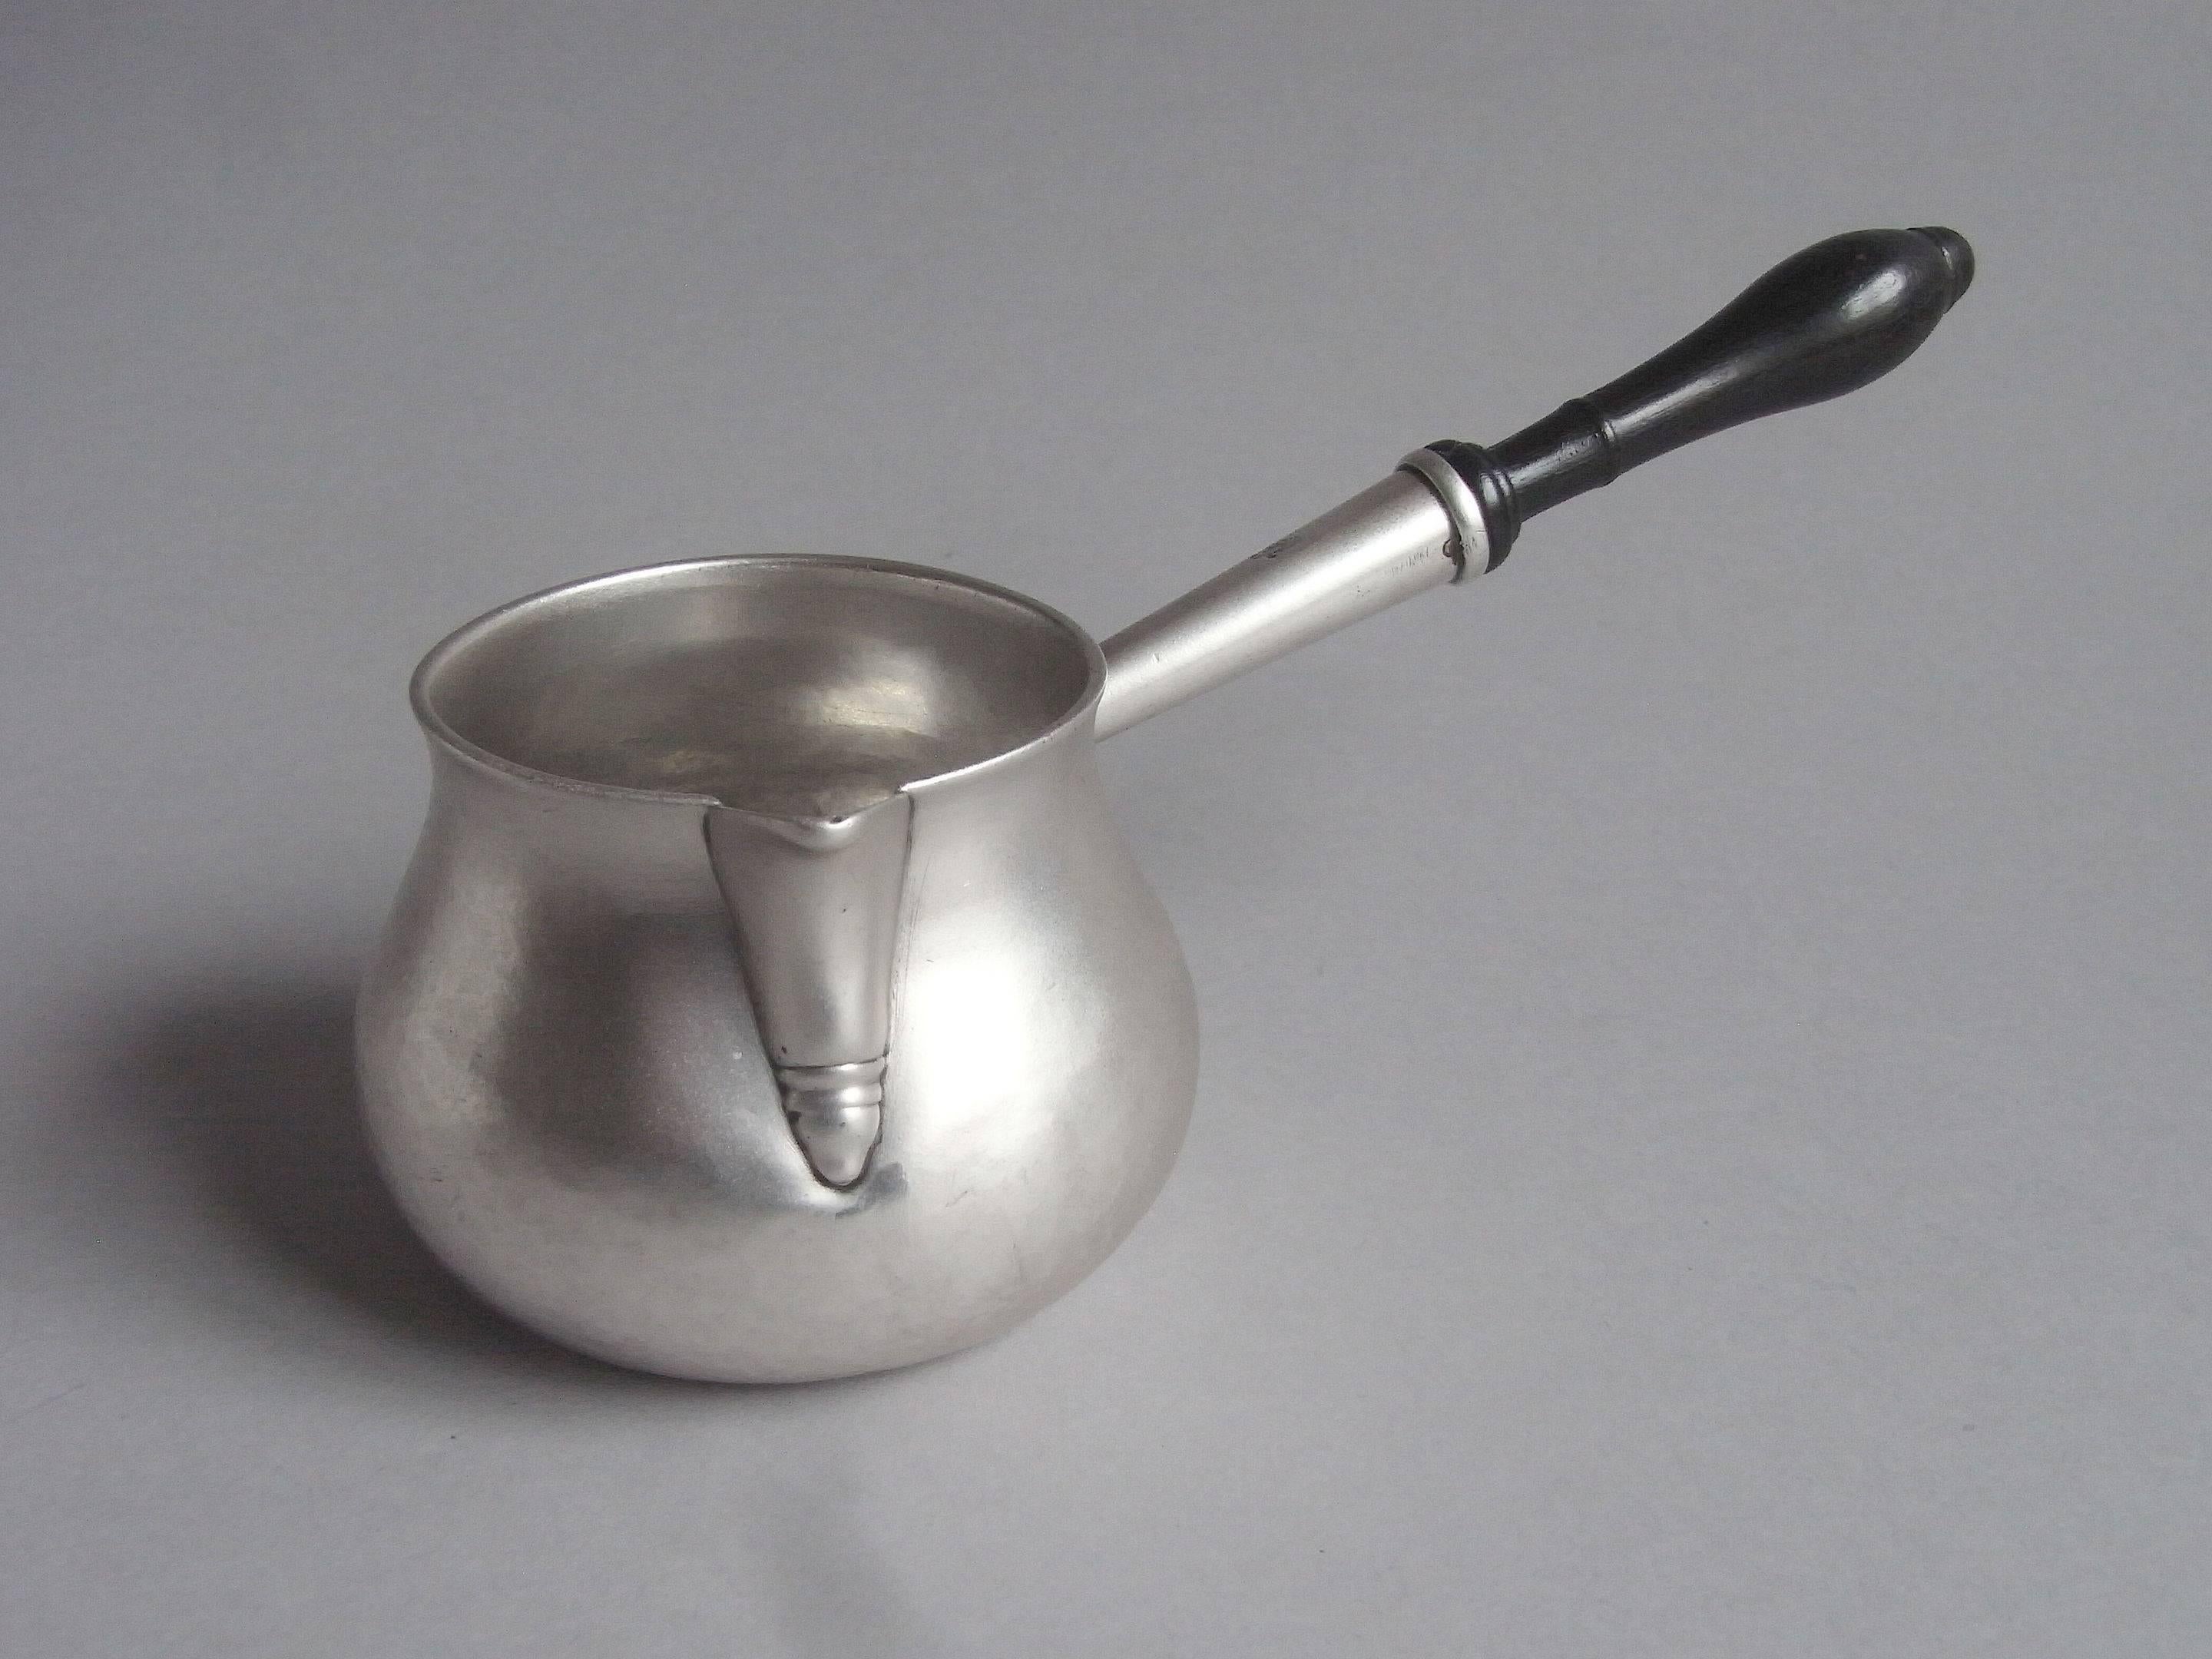 The saucepan is of a small size and has a baluster shaped body rising to an everted rim. The sparrow beak spout is decorated with a double drop below and the silver section of the handle is attached to the main body with a heart shaped molding and